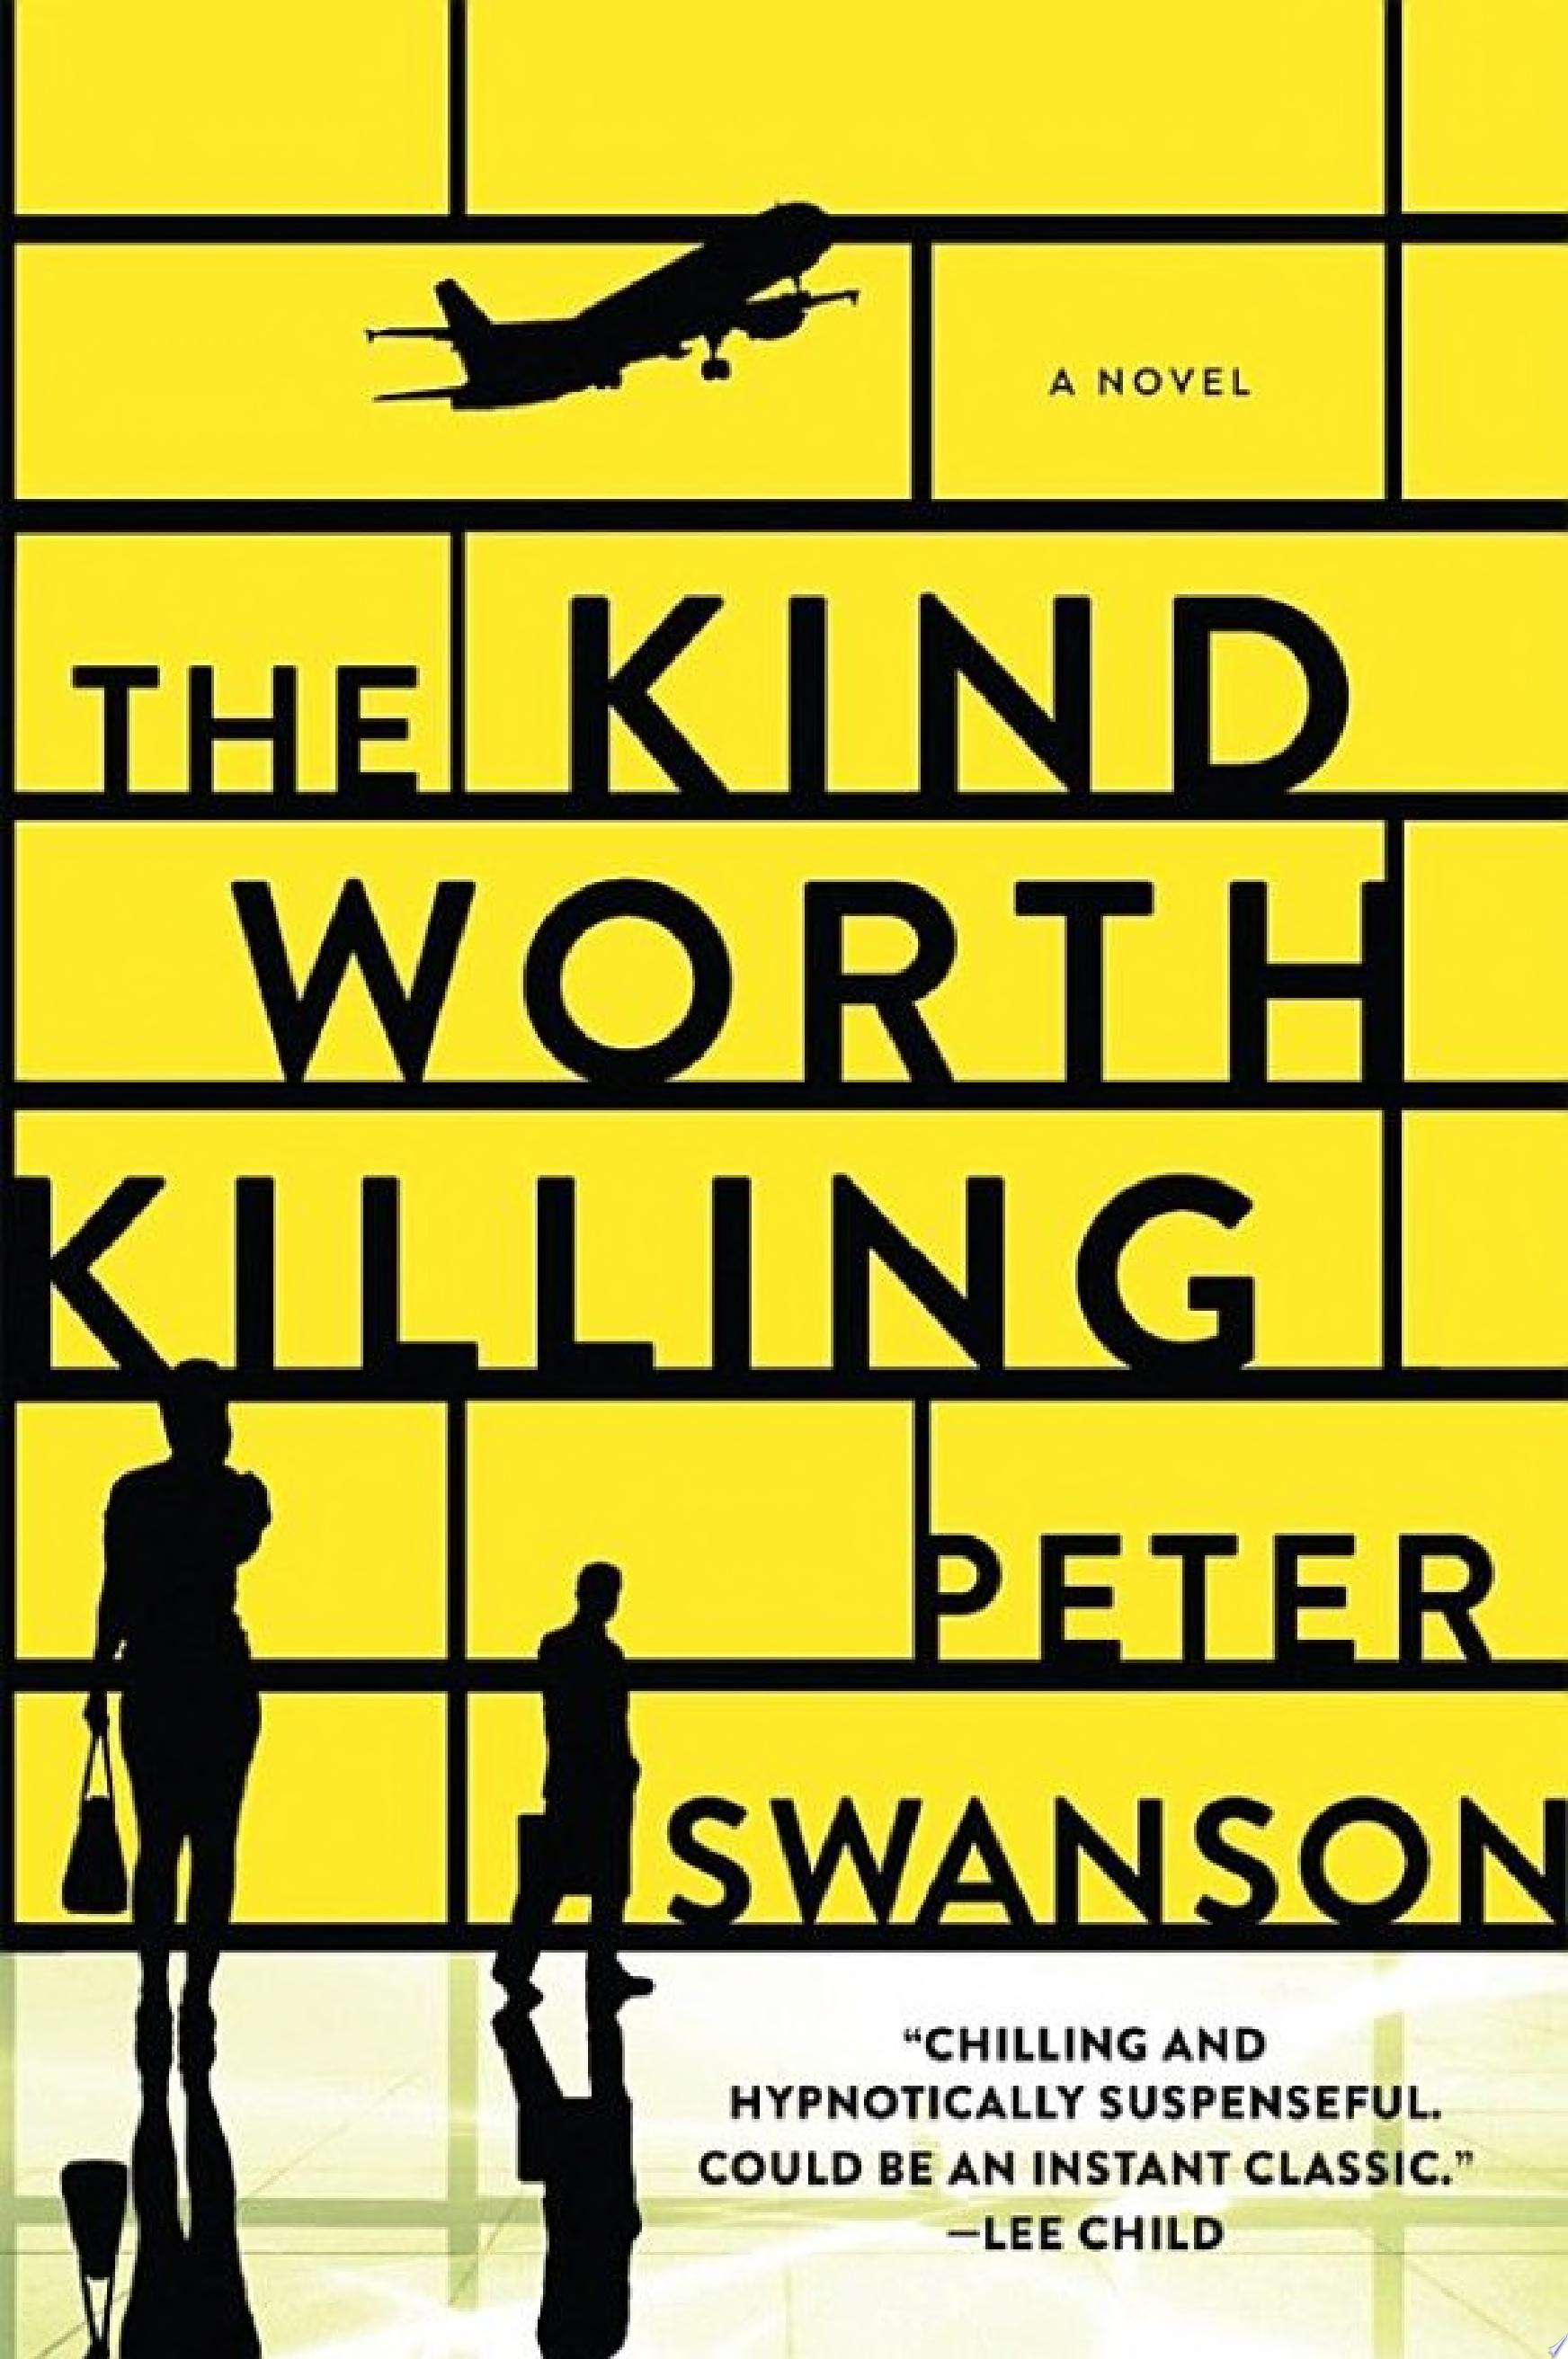 Image for "The Kind Worth Killing"